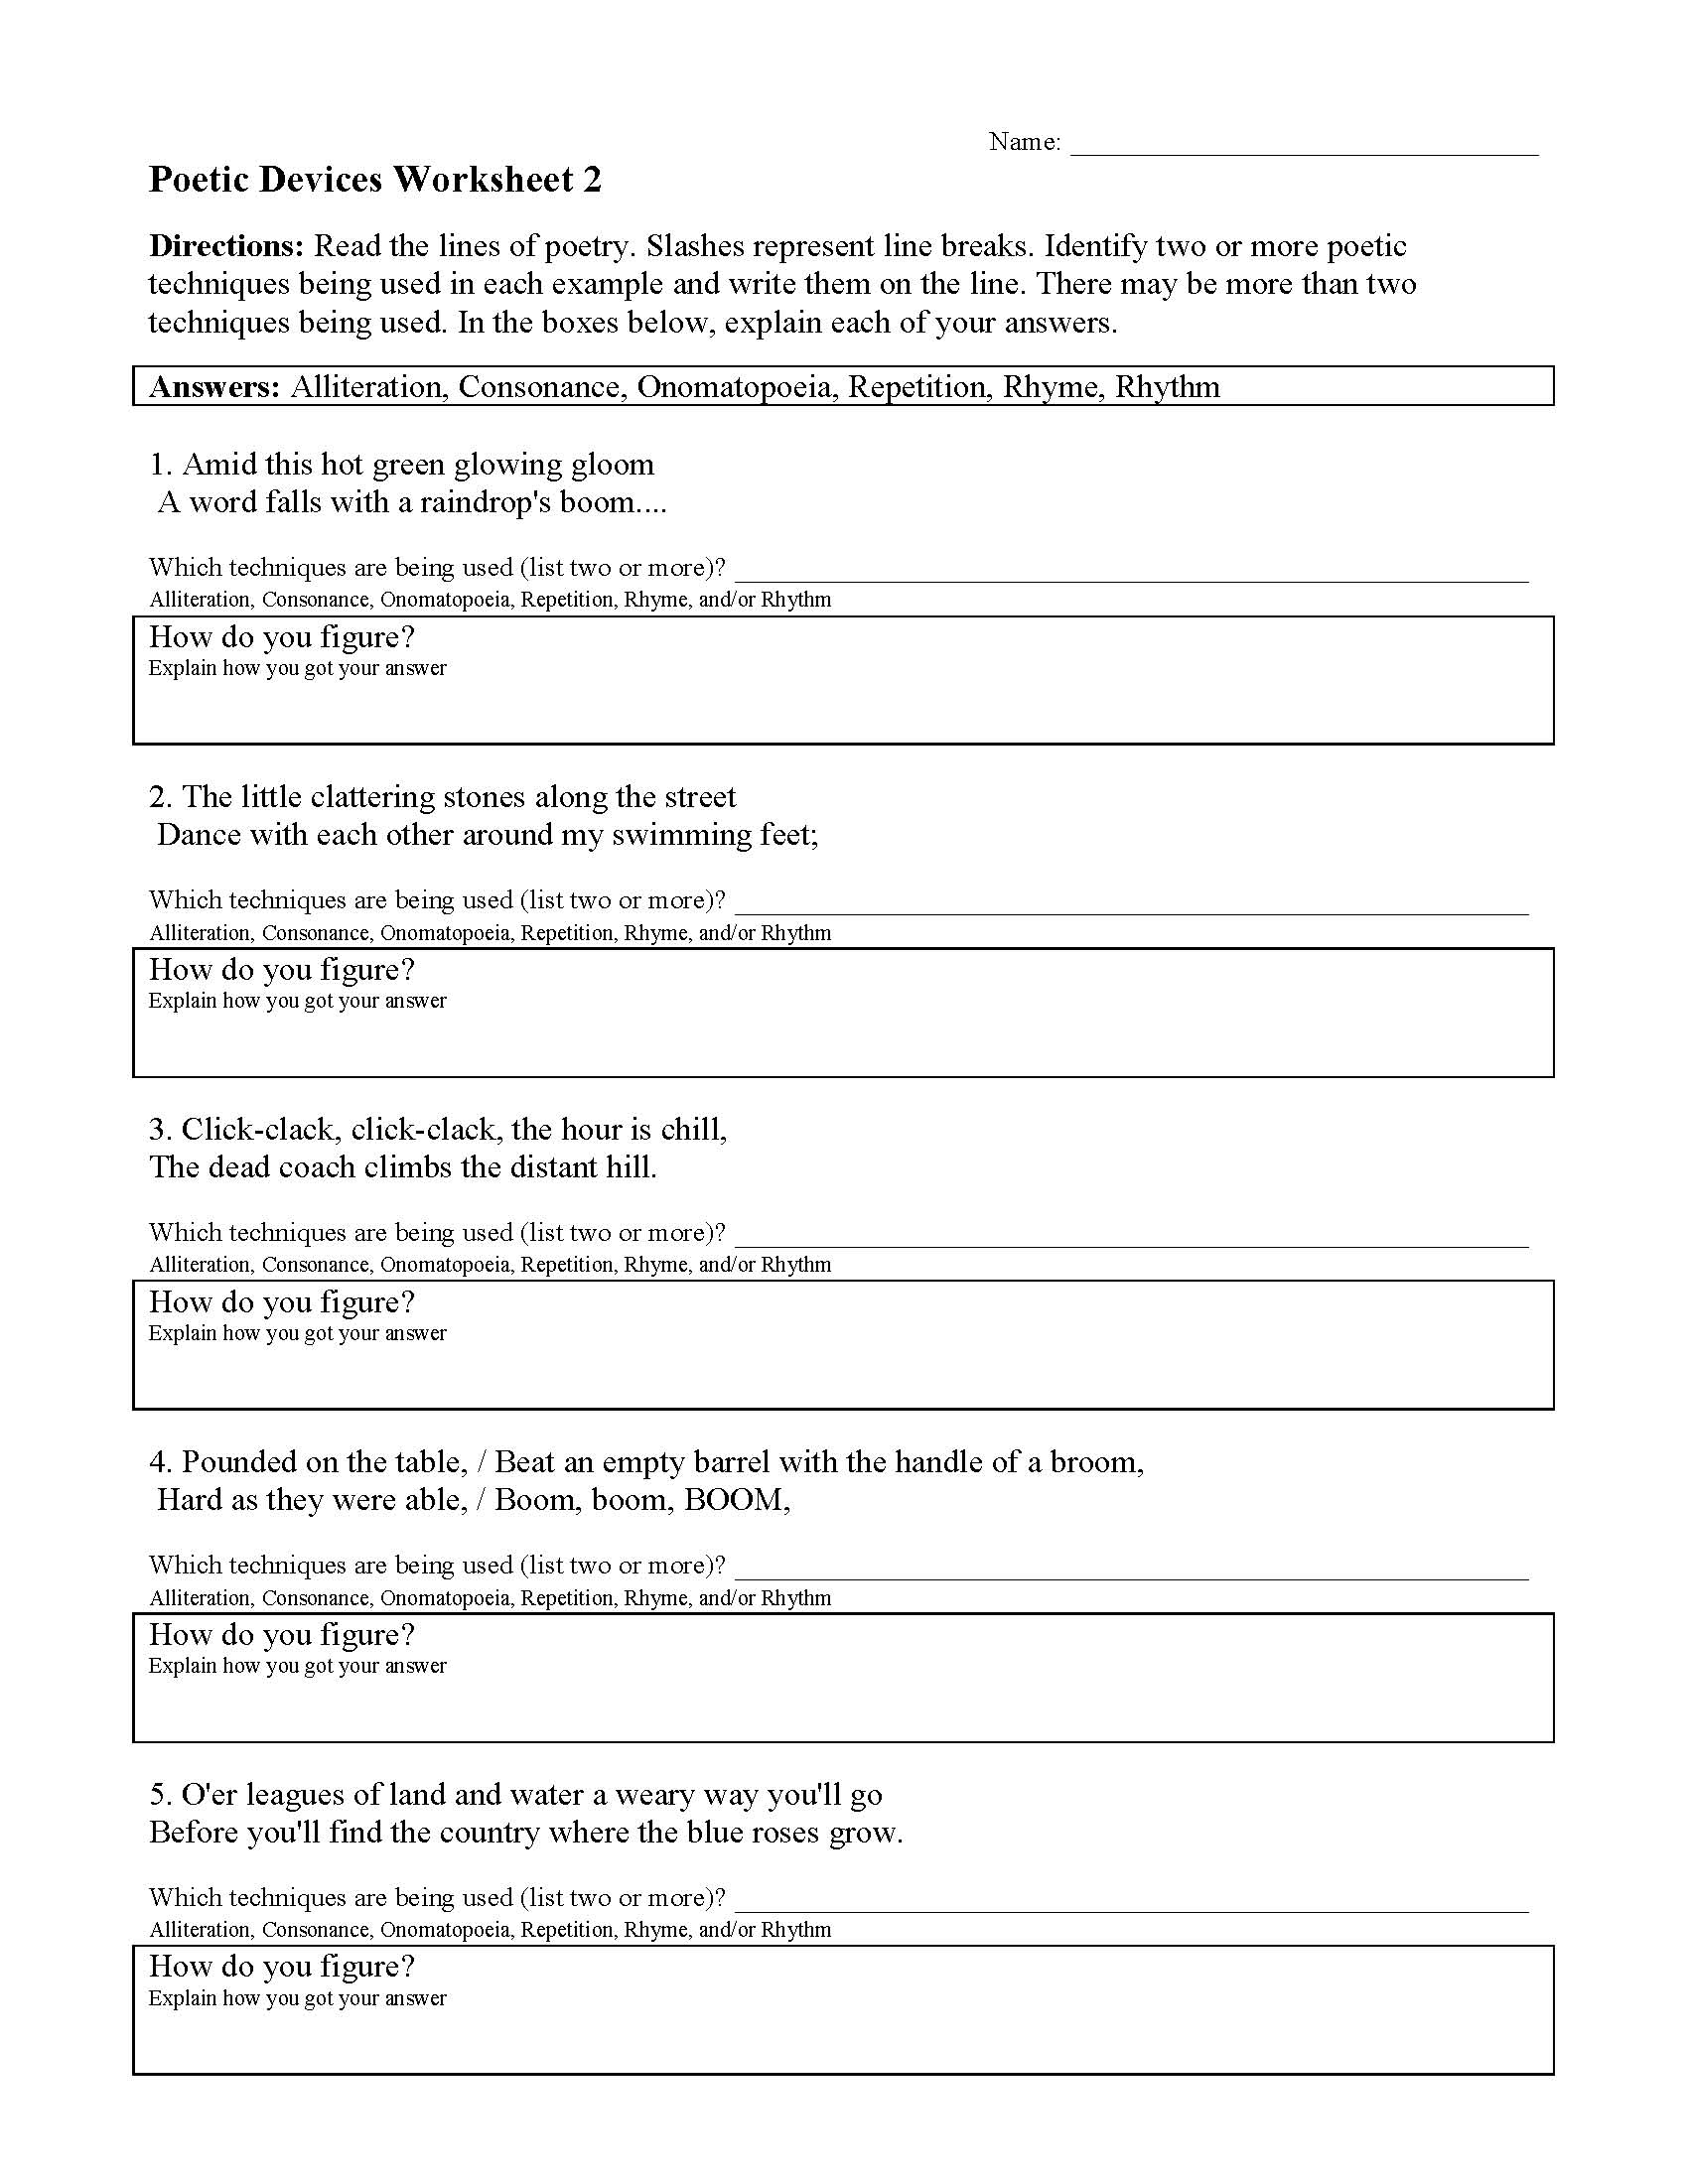 This is a preview image of Poetic Devices Worksheet 2. Click on it to enlarge it or view the source file.